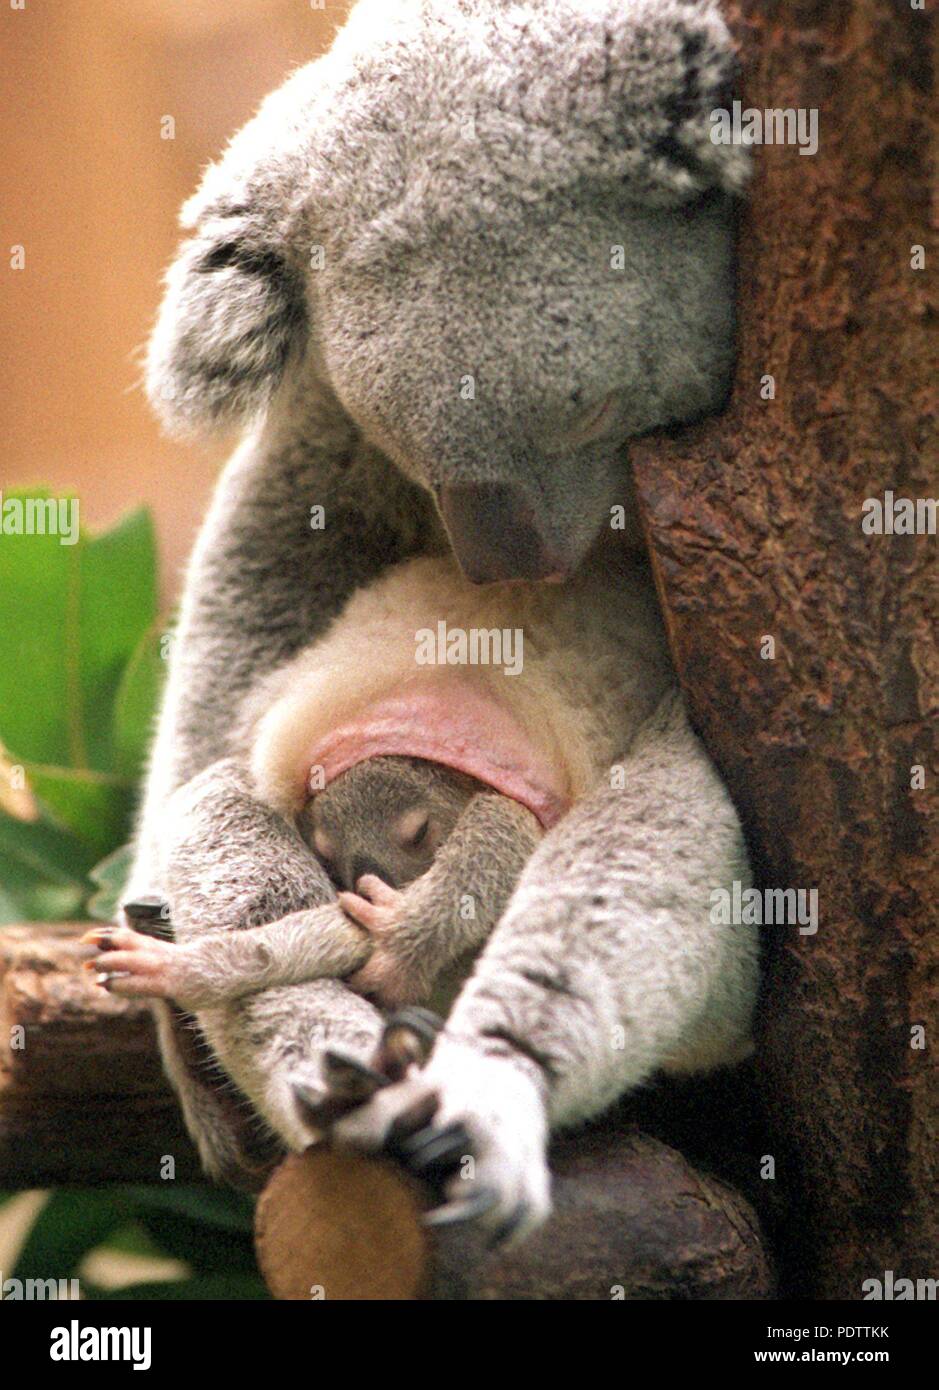 A baby koala in the pouch of its mother 